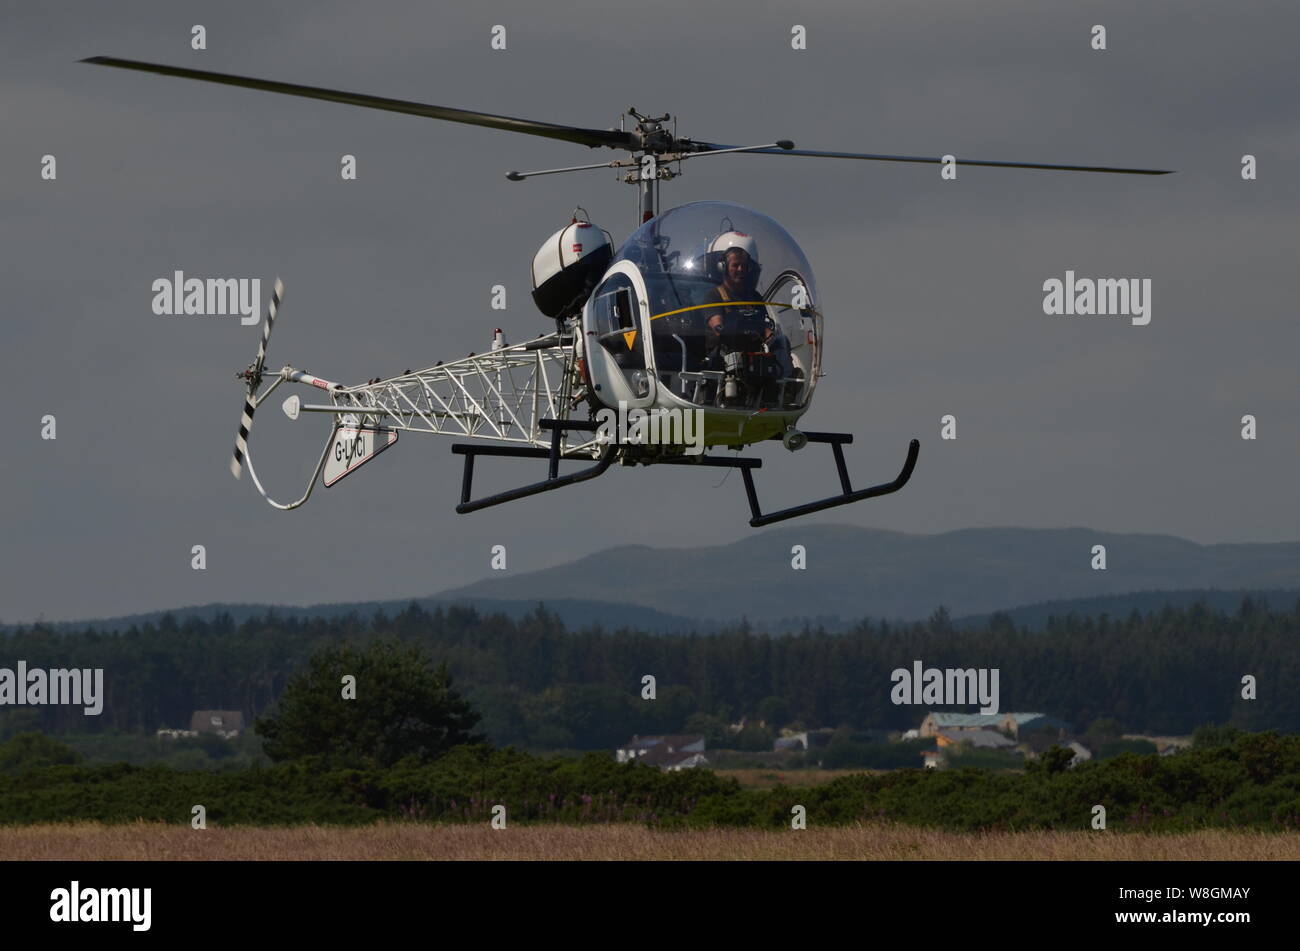 A 1961 Bell 47G-5 helicopter arriving at the Light Aircraft Association's 2019 annual fly-in event at Dornoch Airstrip, Scottish Highlands, UK. Stock Photo